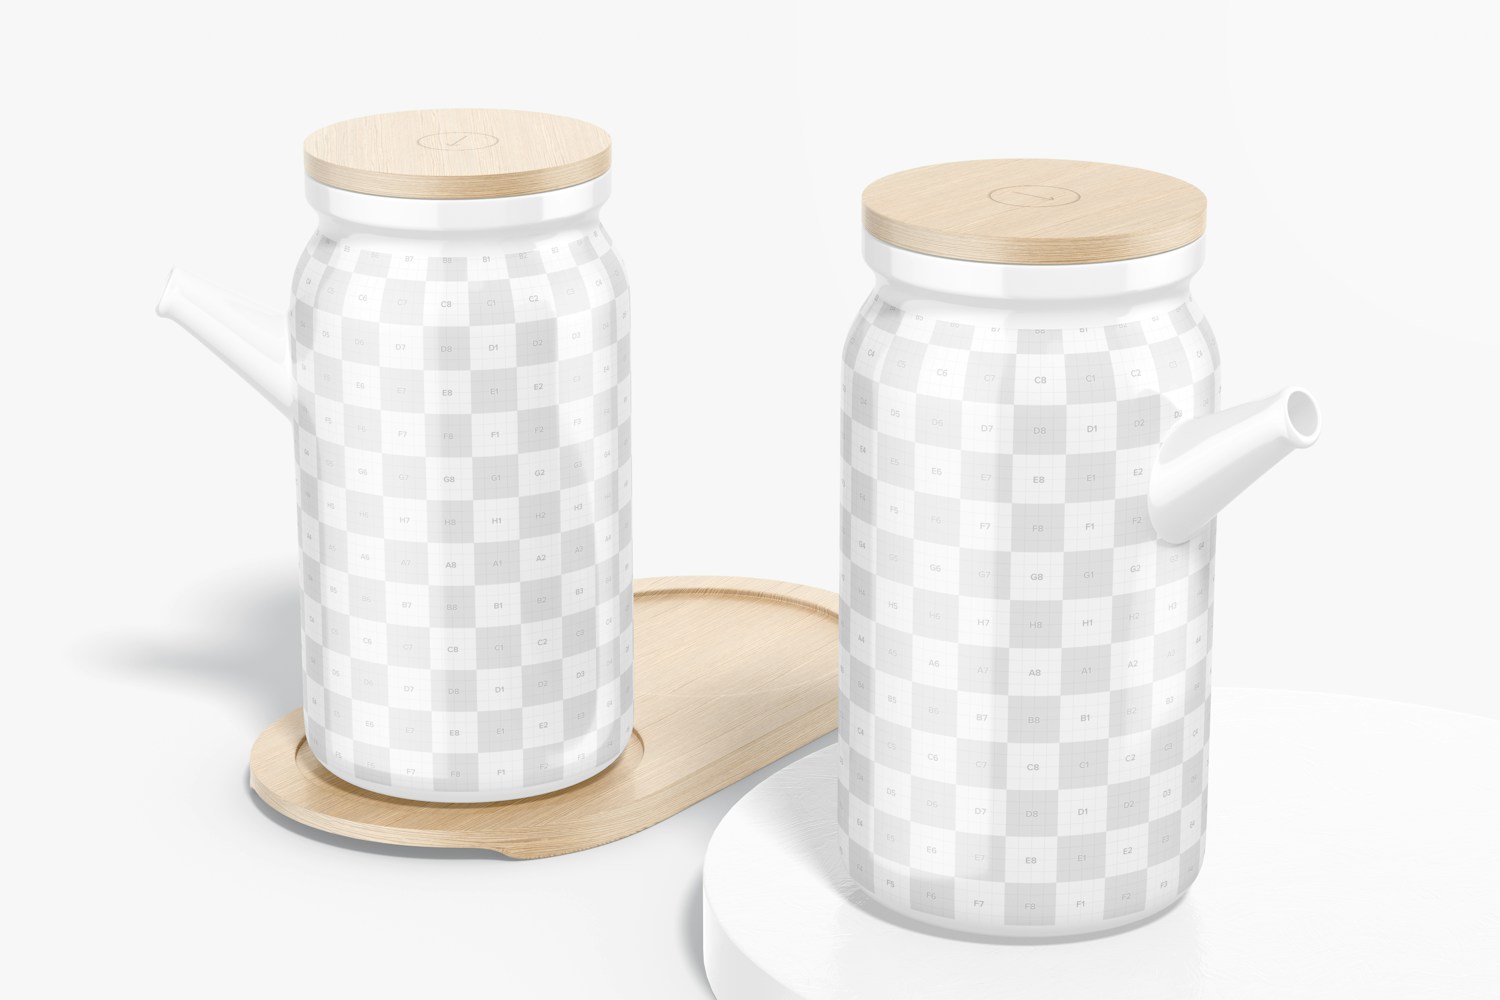 Oil Bottles with Bamboo Tray Mockup